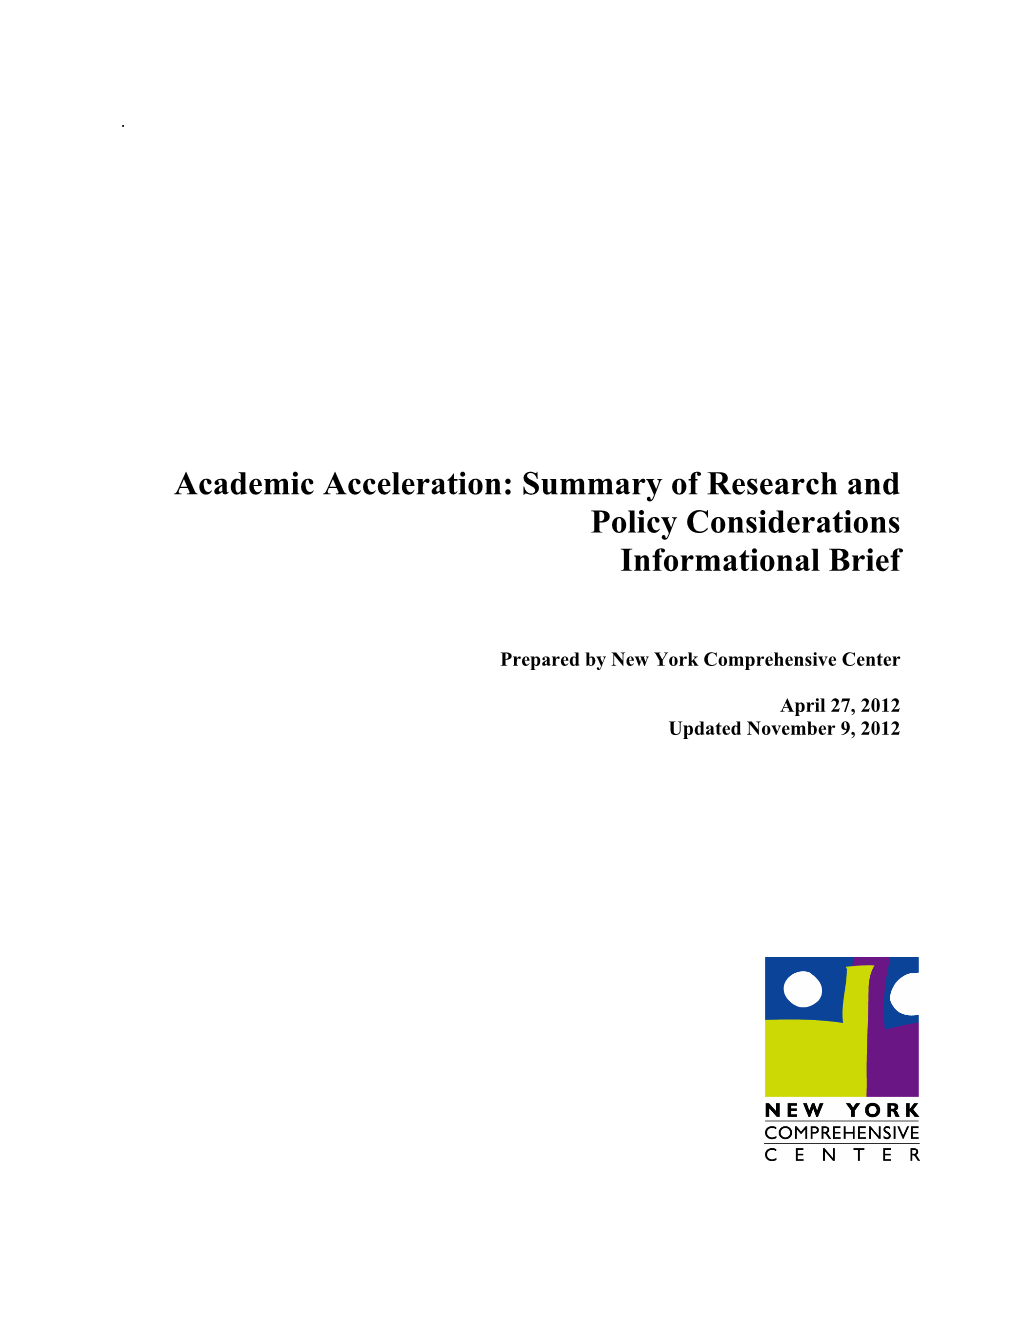 Academic Acceleration: Summary of Research and Policy Considerations Informational Brief